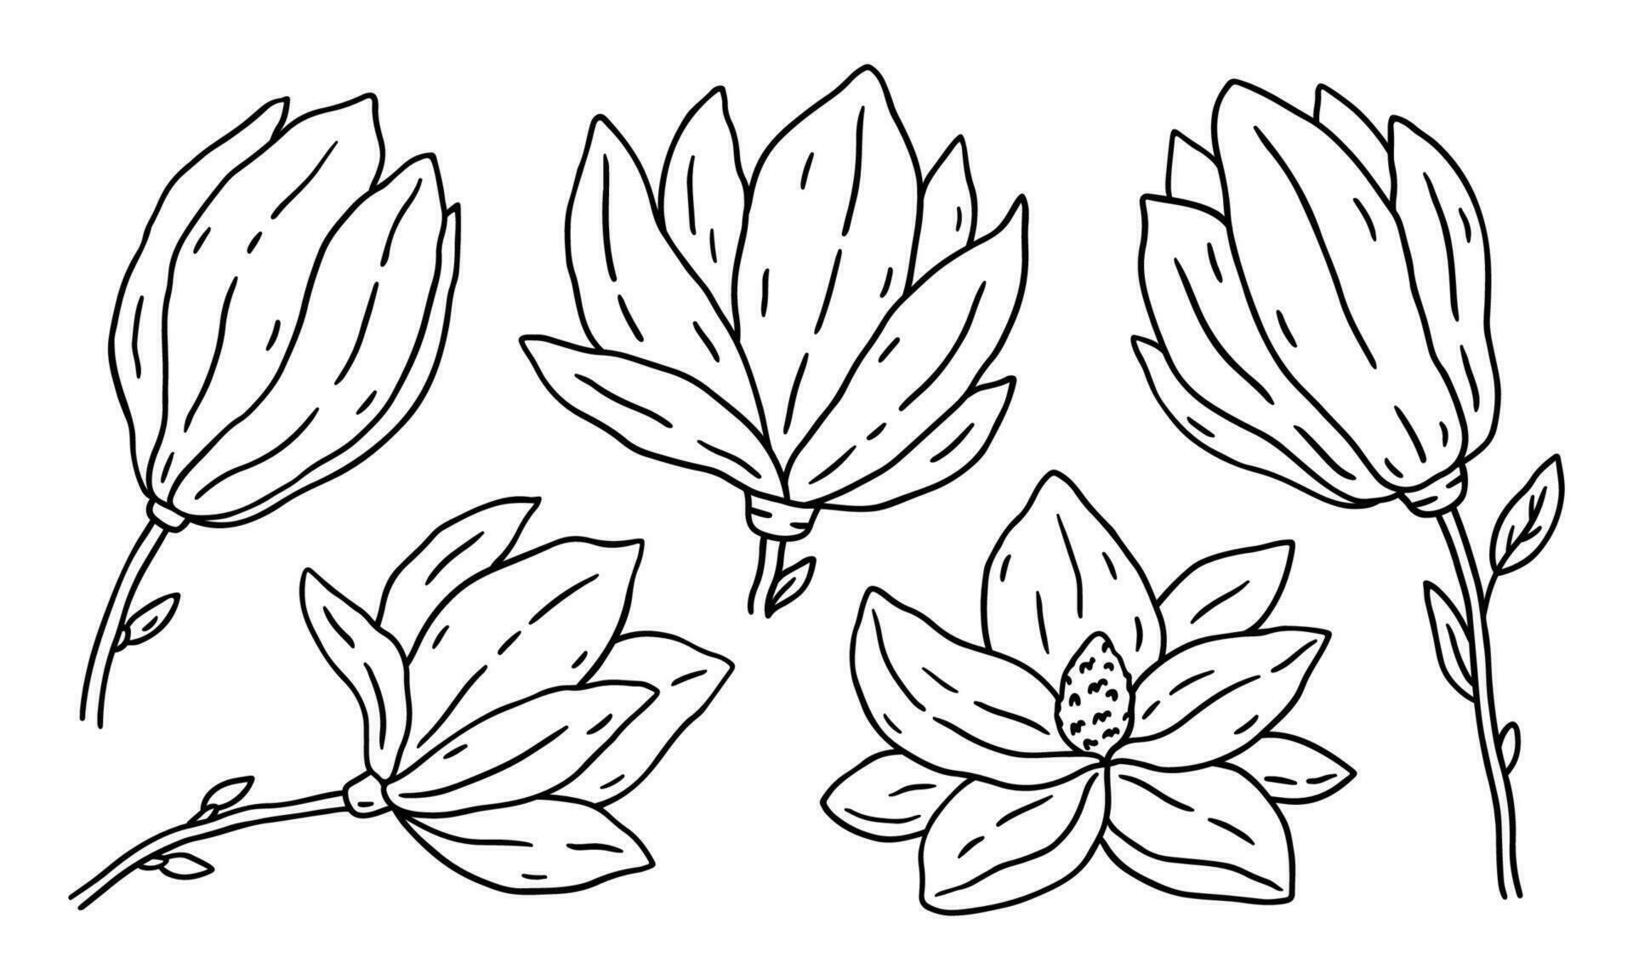 Set of Magnolia flowers isolated on white background. Vector hand-drawn illustration in outline style. Perfect for cards, decorations, logo, various designs. Botanical clipart.